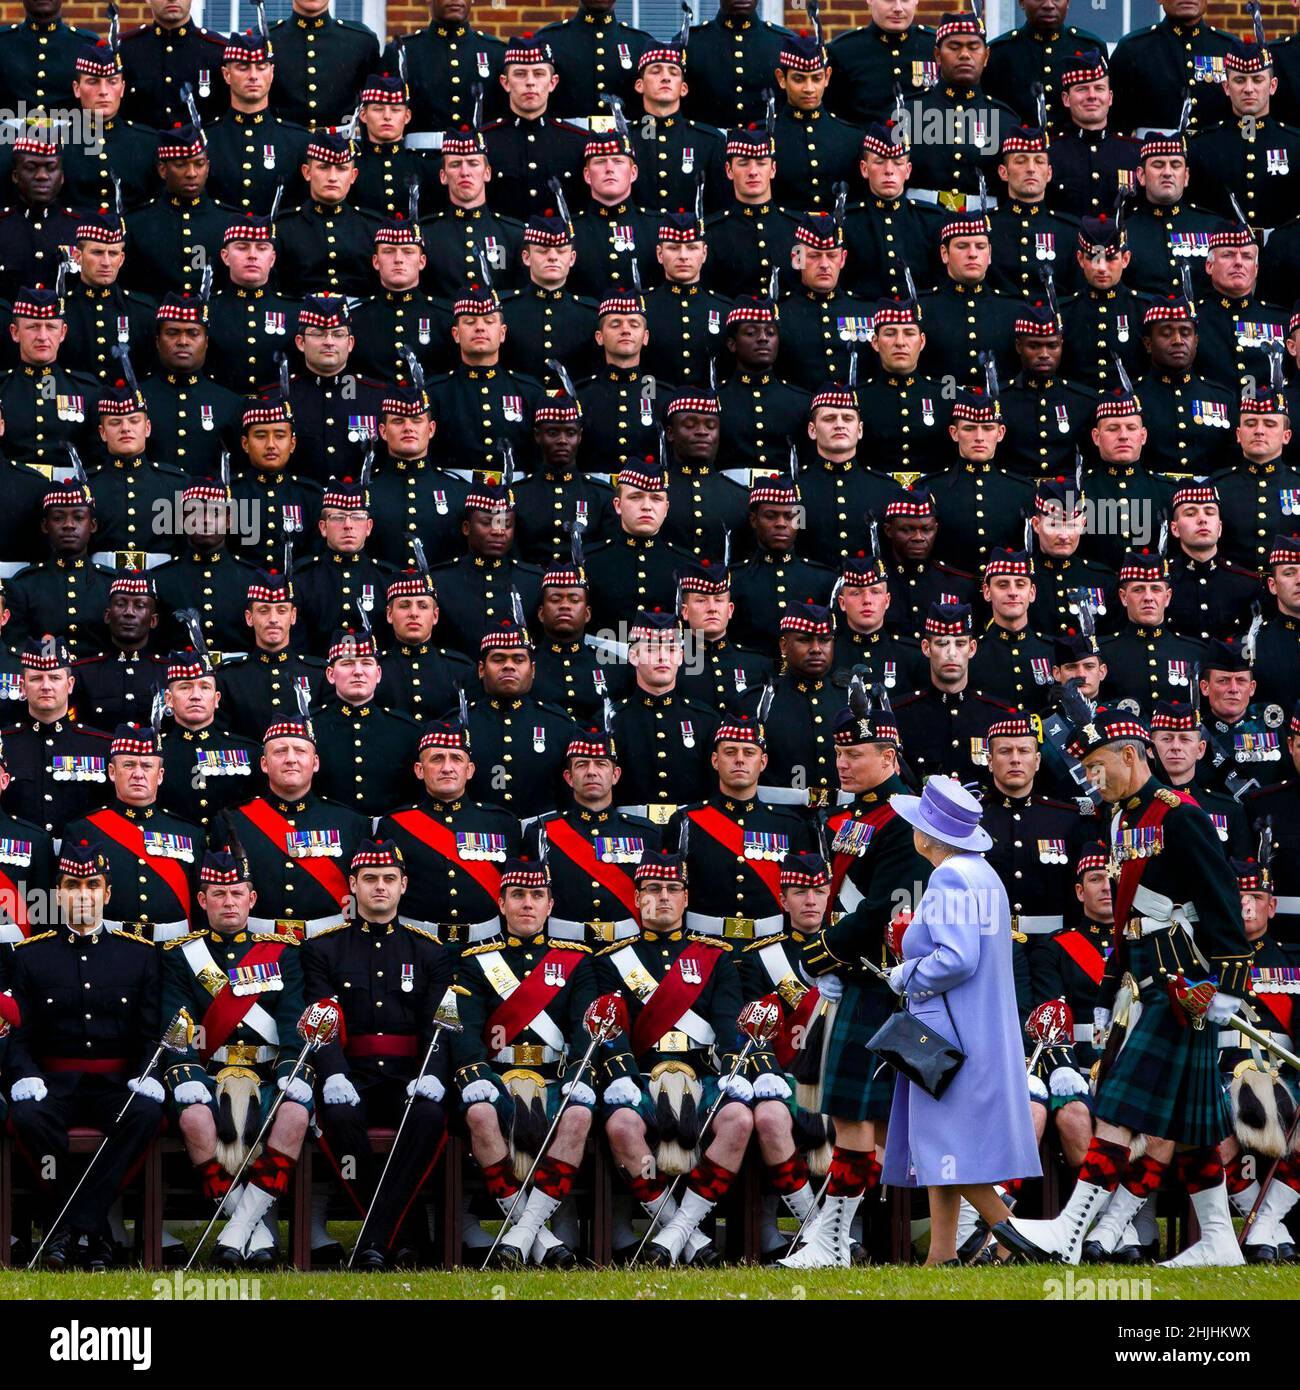 File photo dated 28/06/13 of Queen Elizabeth II joining The Argyll & Sutherland Highlanders, 5th Battalion, Royal Regiment of Scotland (5 SCOTS) for a group photograph during her visit to Howe Barracks in Canterbury, Kent. Issue date: Sunday January 30, 2022. Stock Photo